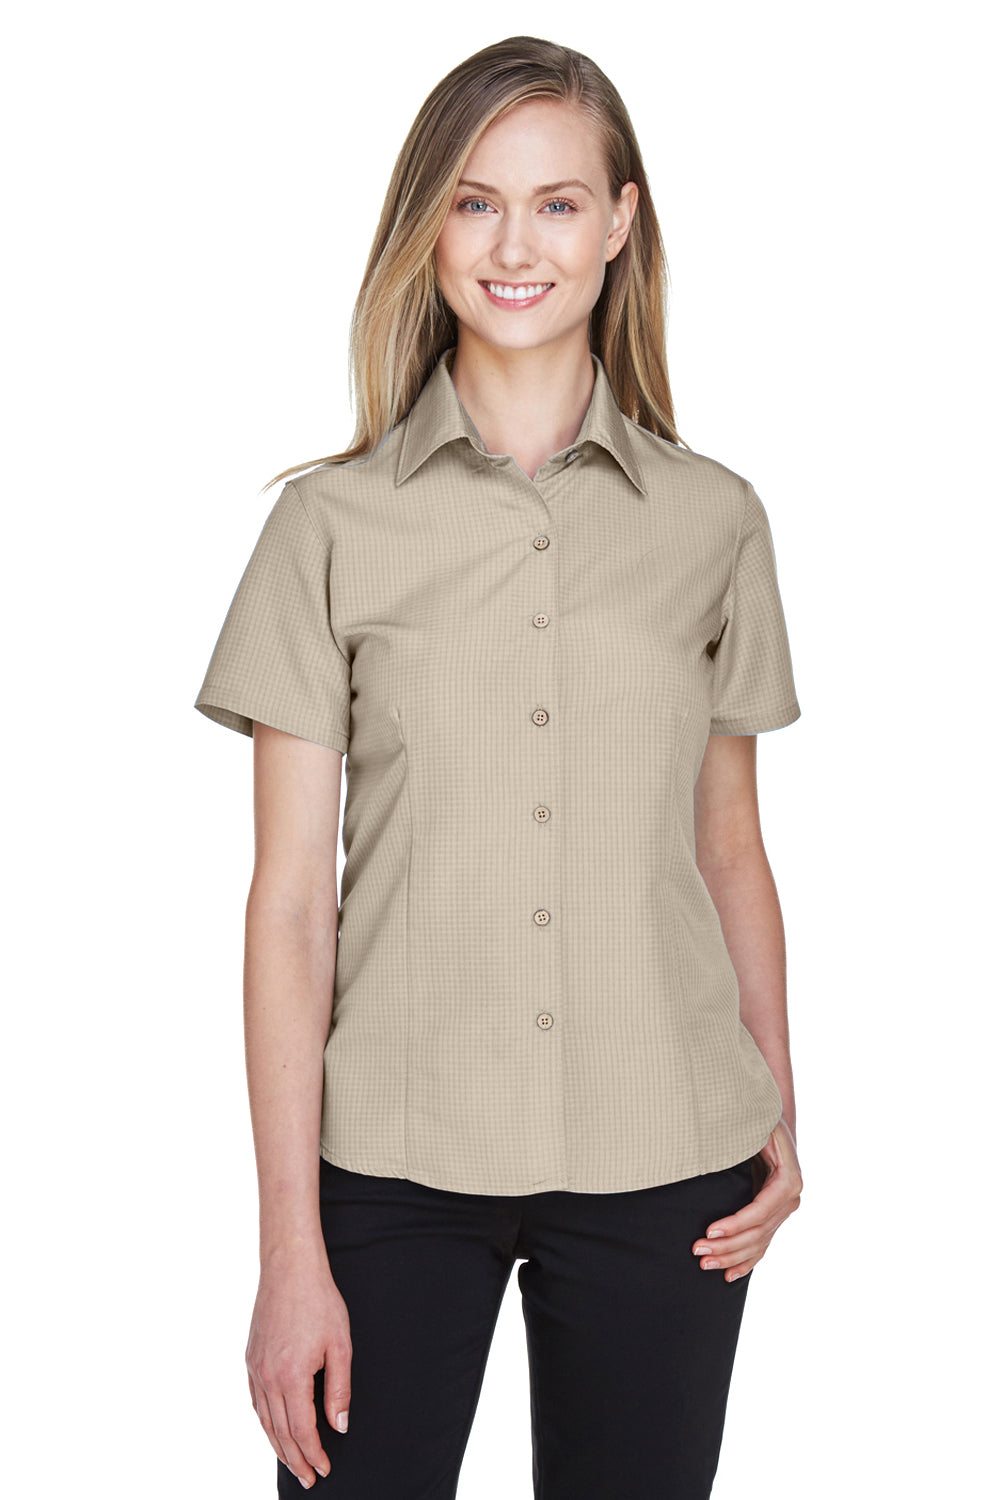 Harriton M560W Womens Barbados Wrinkle Resistant Short Sleeve Button Down Camp Shirt Khaki Brown Front